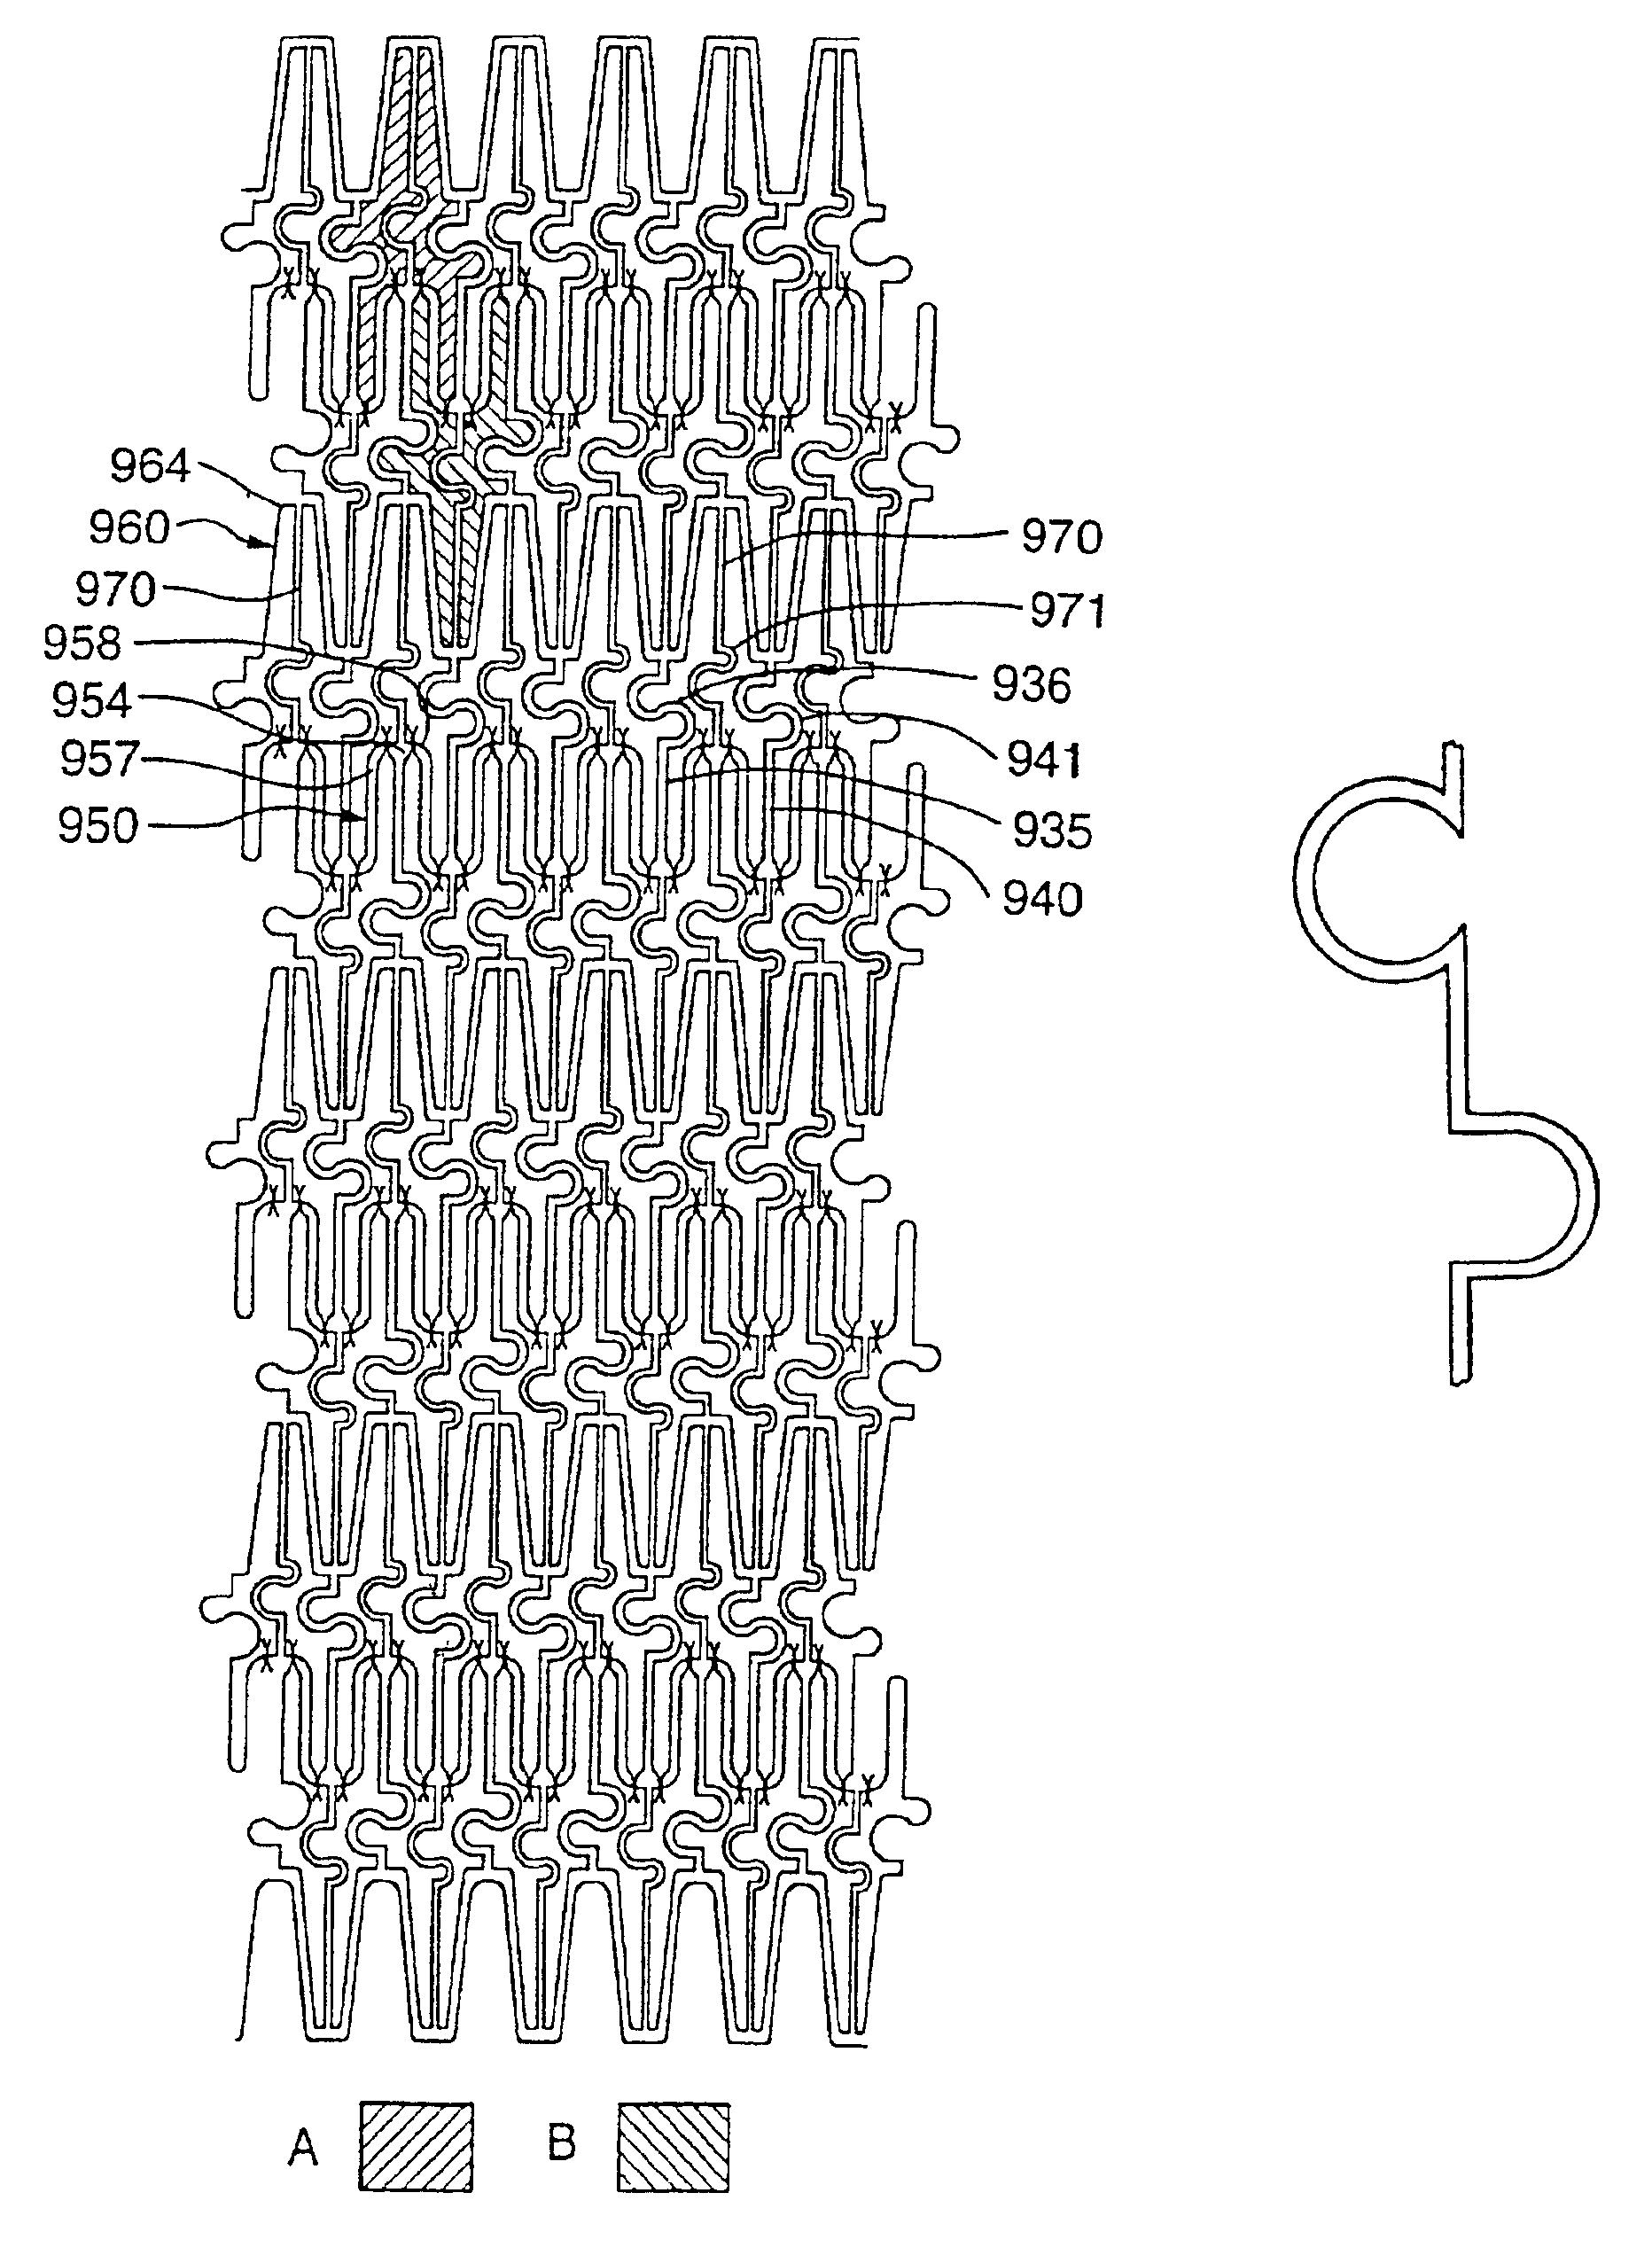 Expandable stent and method for delivery of same